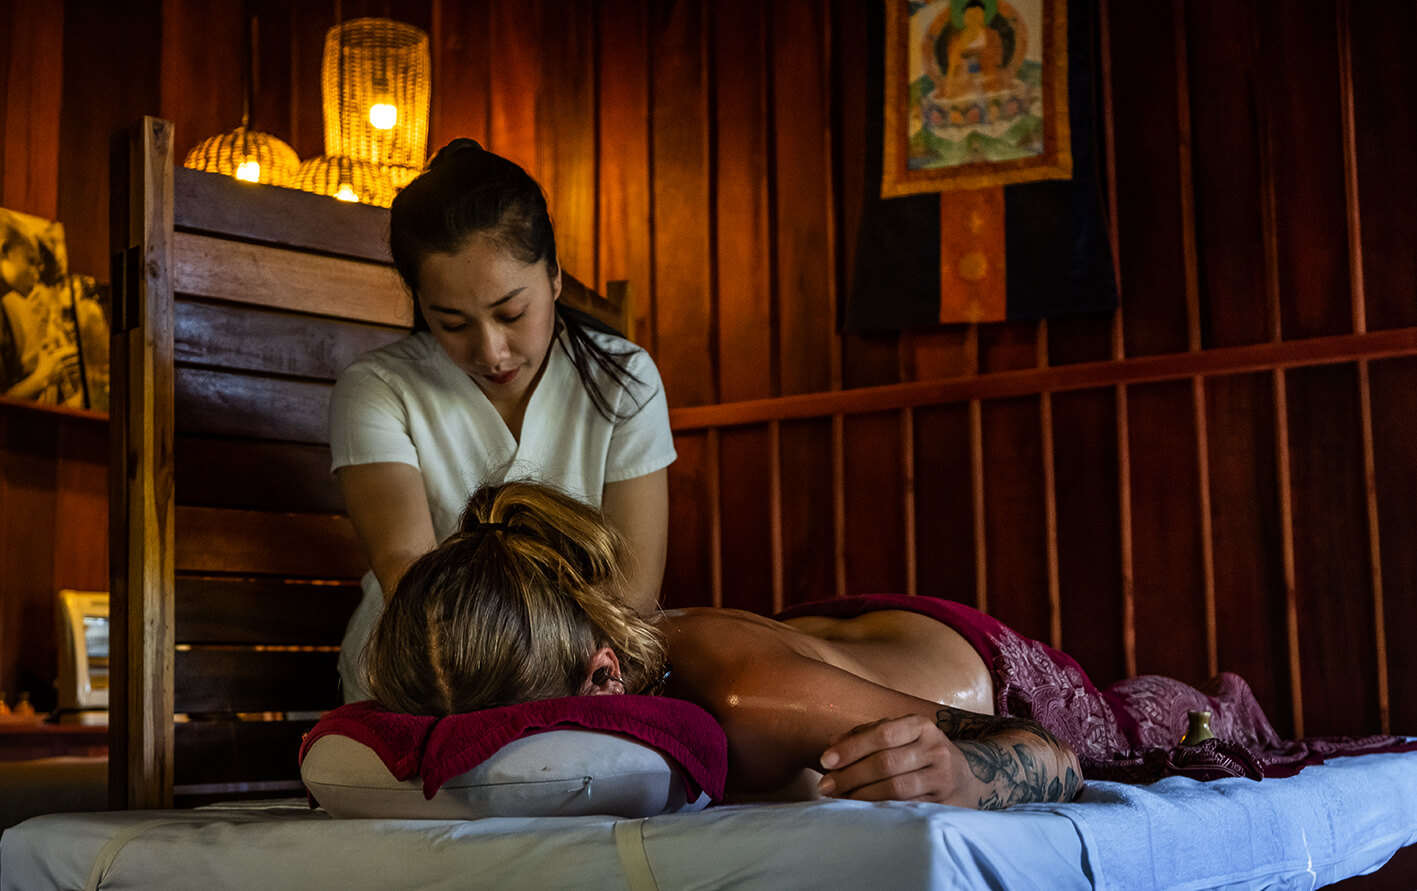 A massage therapist giving a back massage to a woman lying face down on a massage table in a dimly lit room with wooden decor, overlooking the serene Namkhan River in Luang Prabang